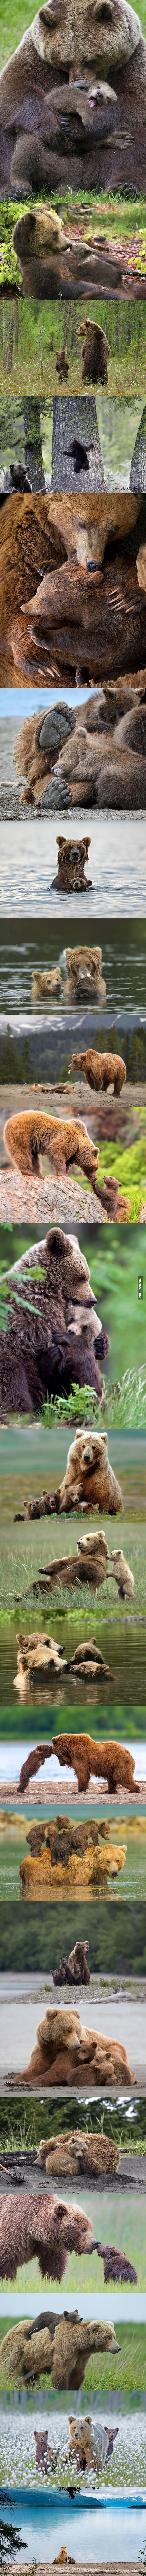 http://social.phinf.naver.net/20160929_189/14750874696130JiFj_JPEG/For-the-picture-of-Momma-bear-carrying-her-child-here-is-the-picture-set.jpg?type=w710_1